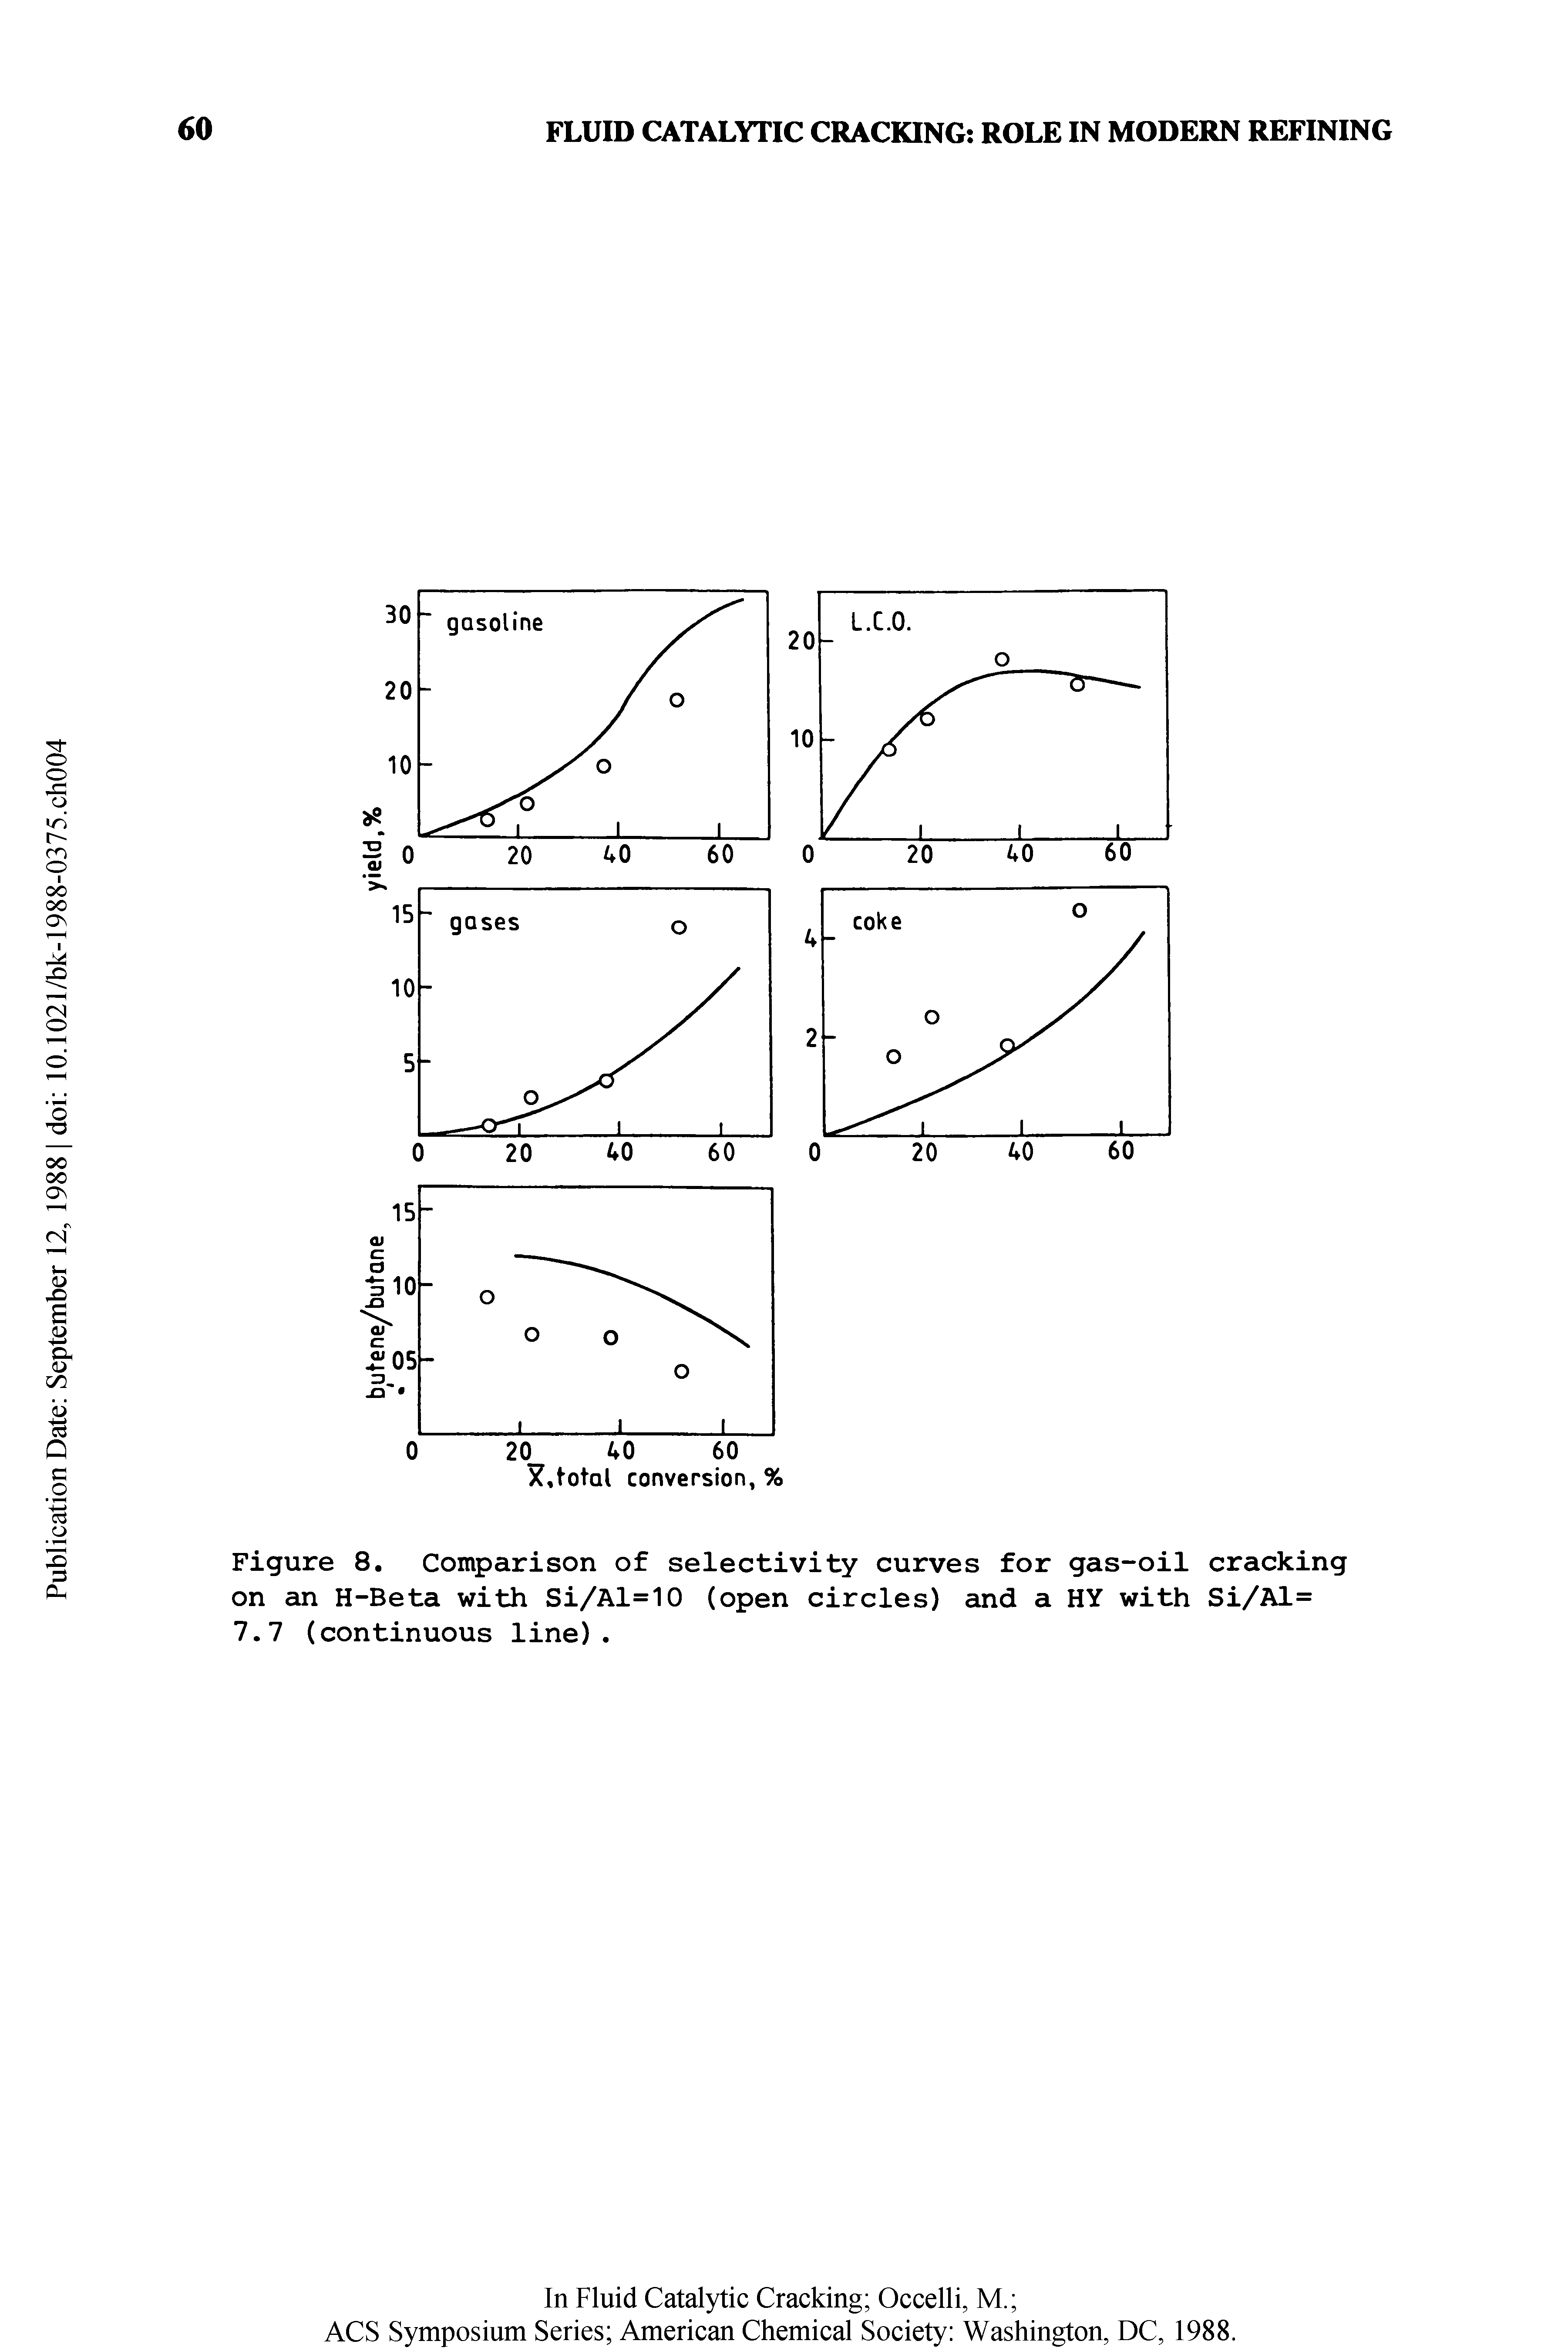 Figure 8. Comparison of selectivity curves for gas-oil cracking on an H-Beta with Si/Al=10 (open circles) and a HY with Si/Al= 7.7 (continuous line).